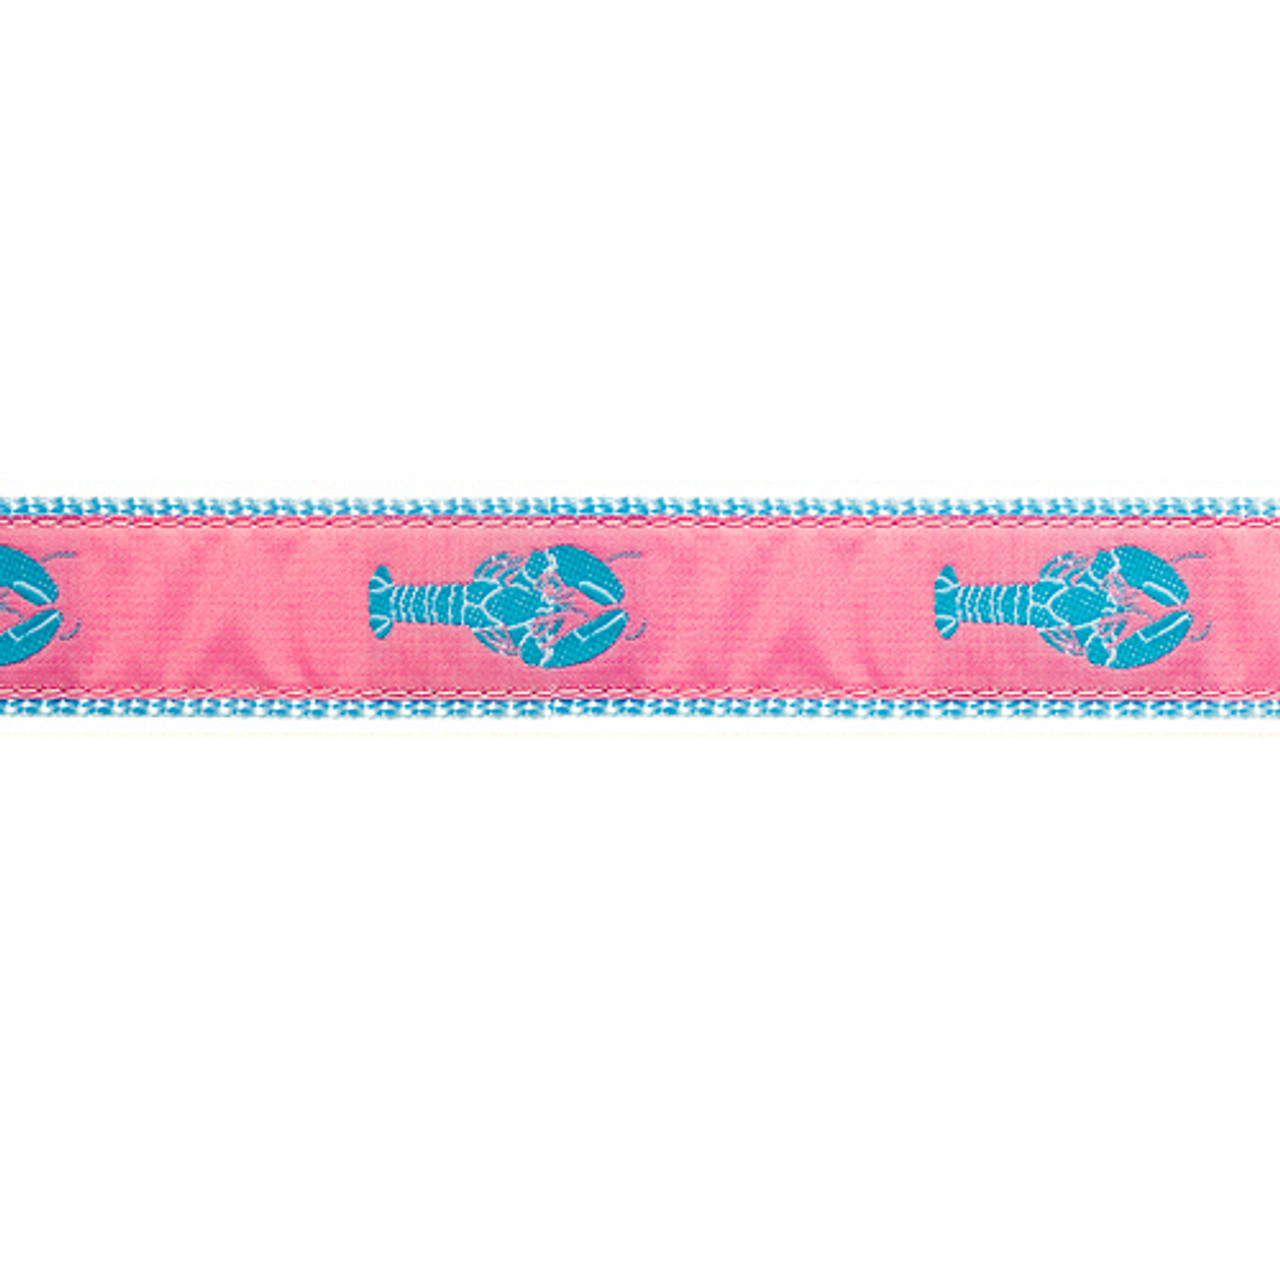  Paws Paws Miami Dog Collar for Small Dogs, Girl or